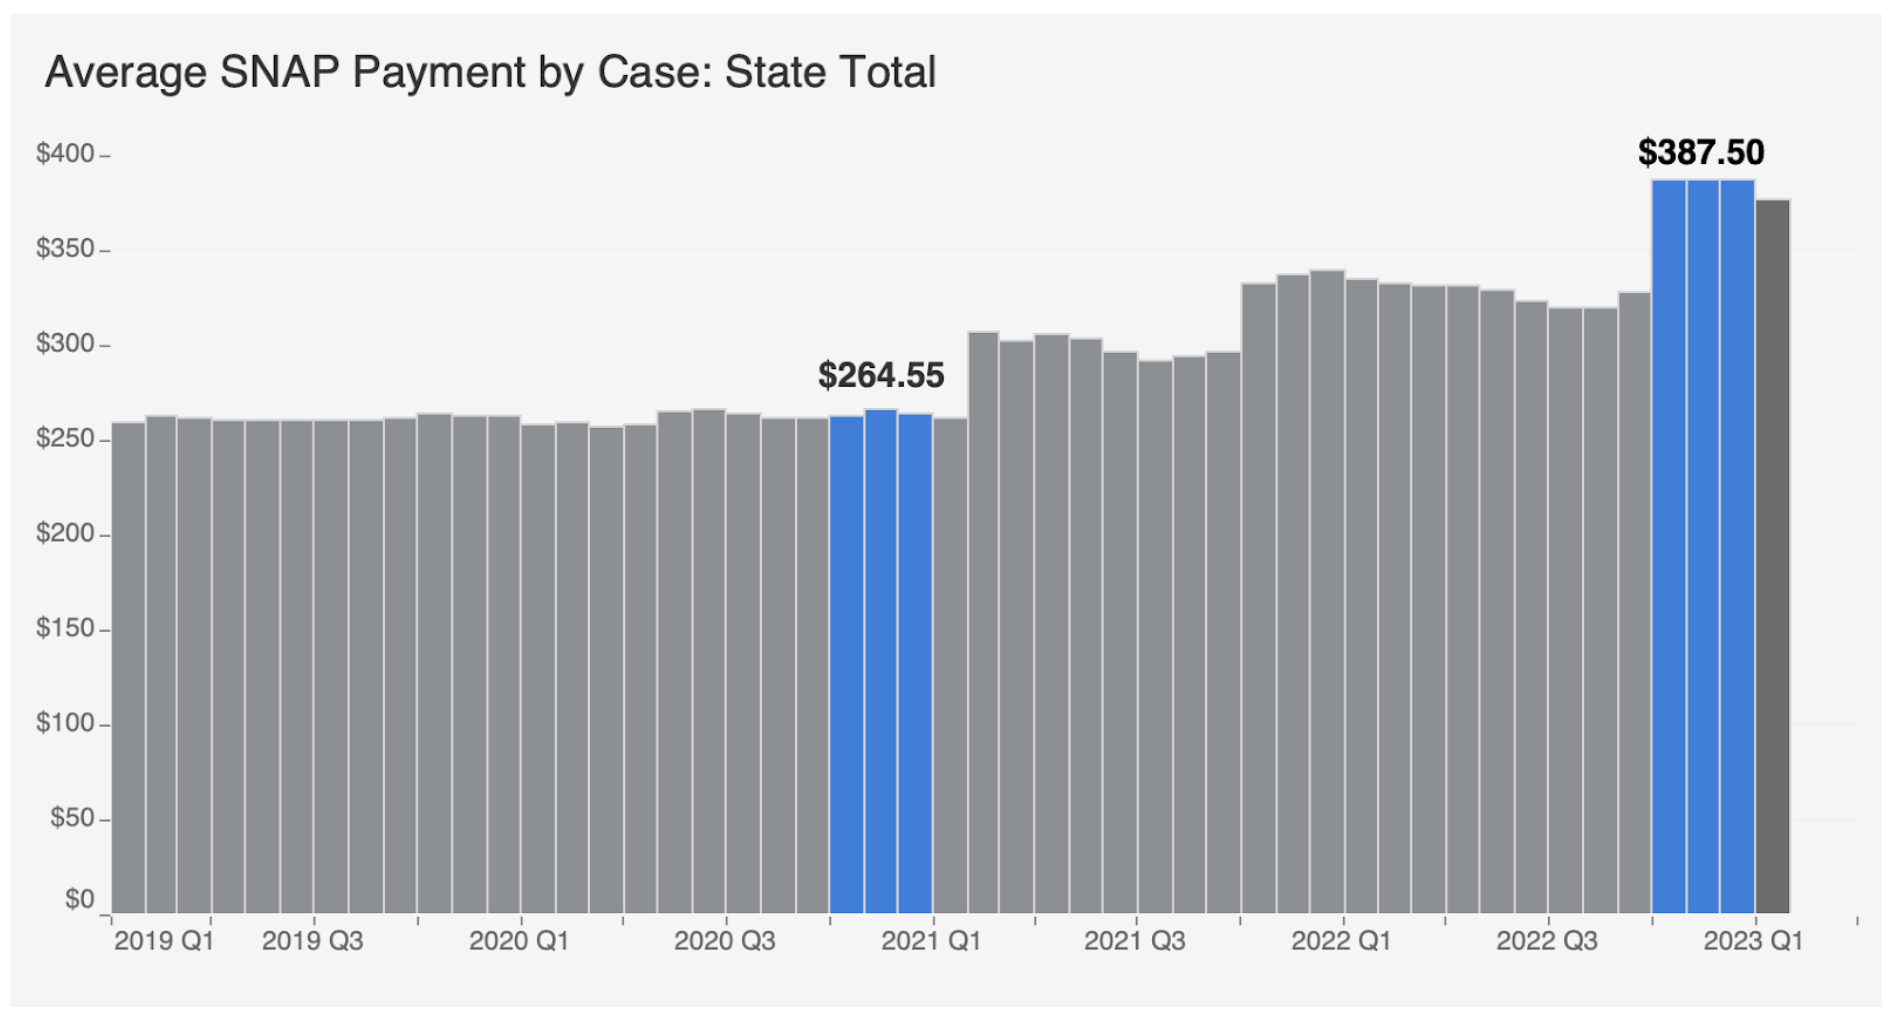 Average SNAP Payment by Case: State Total